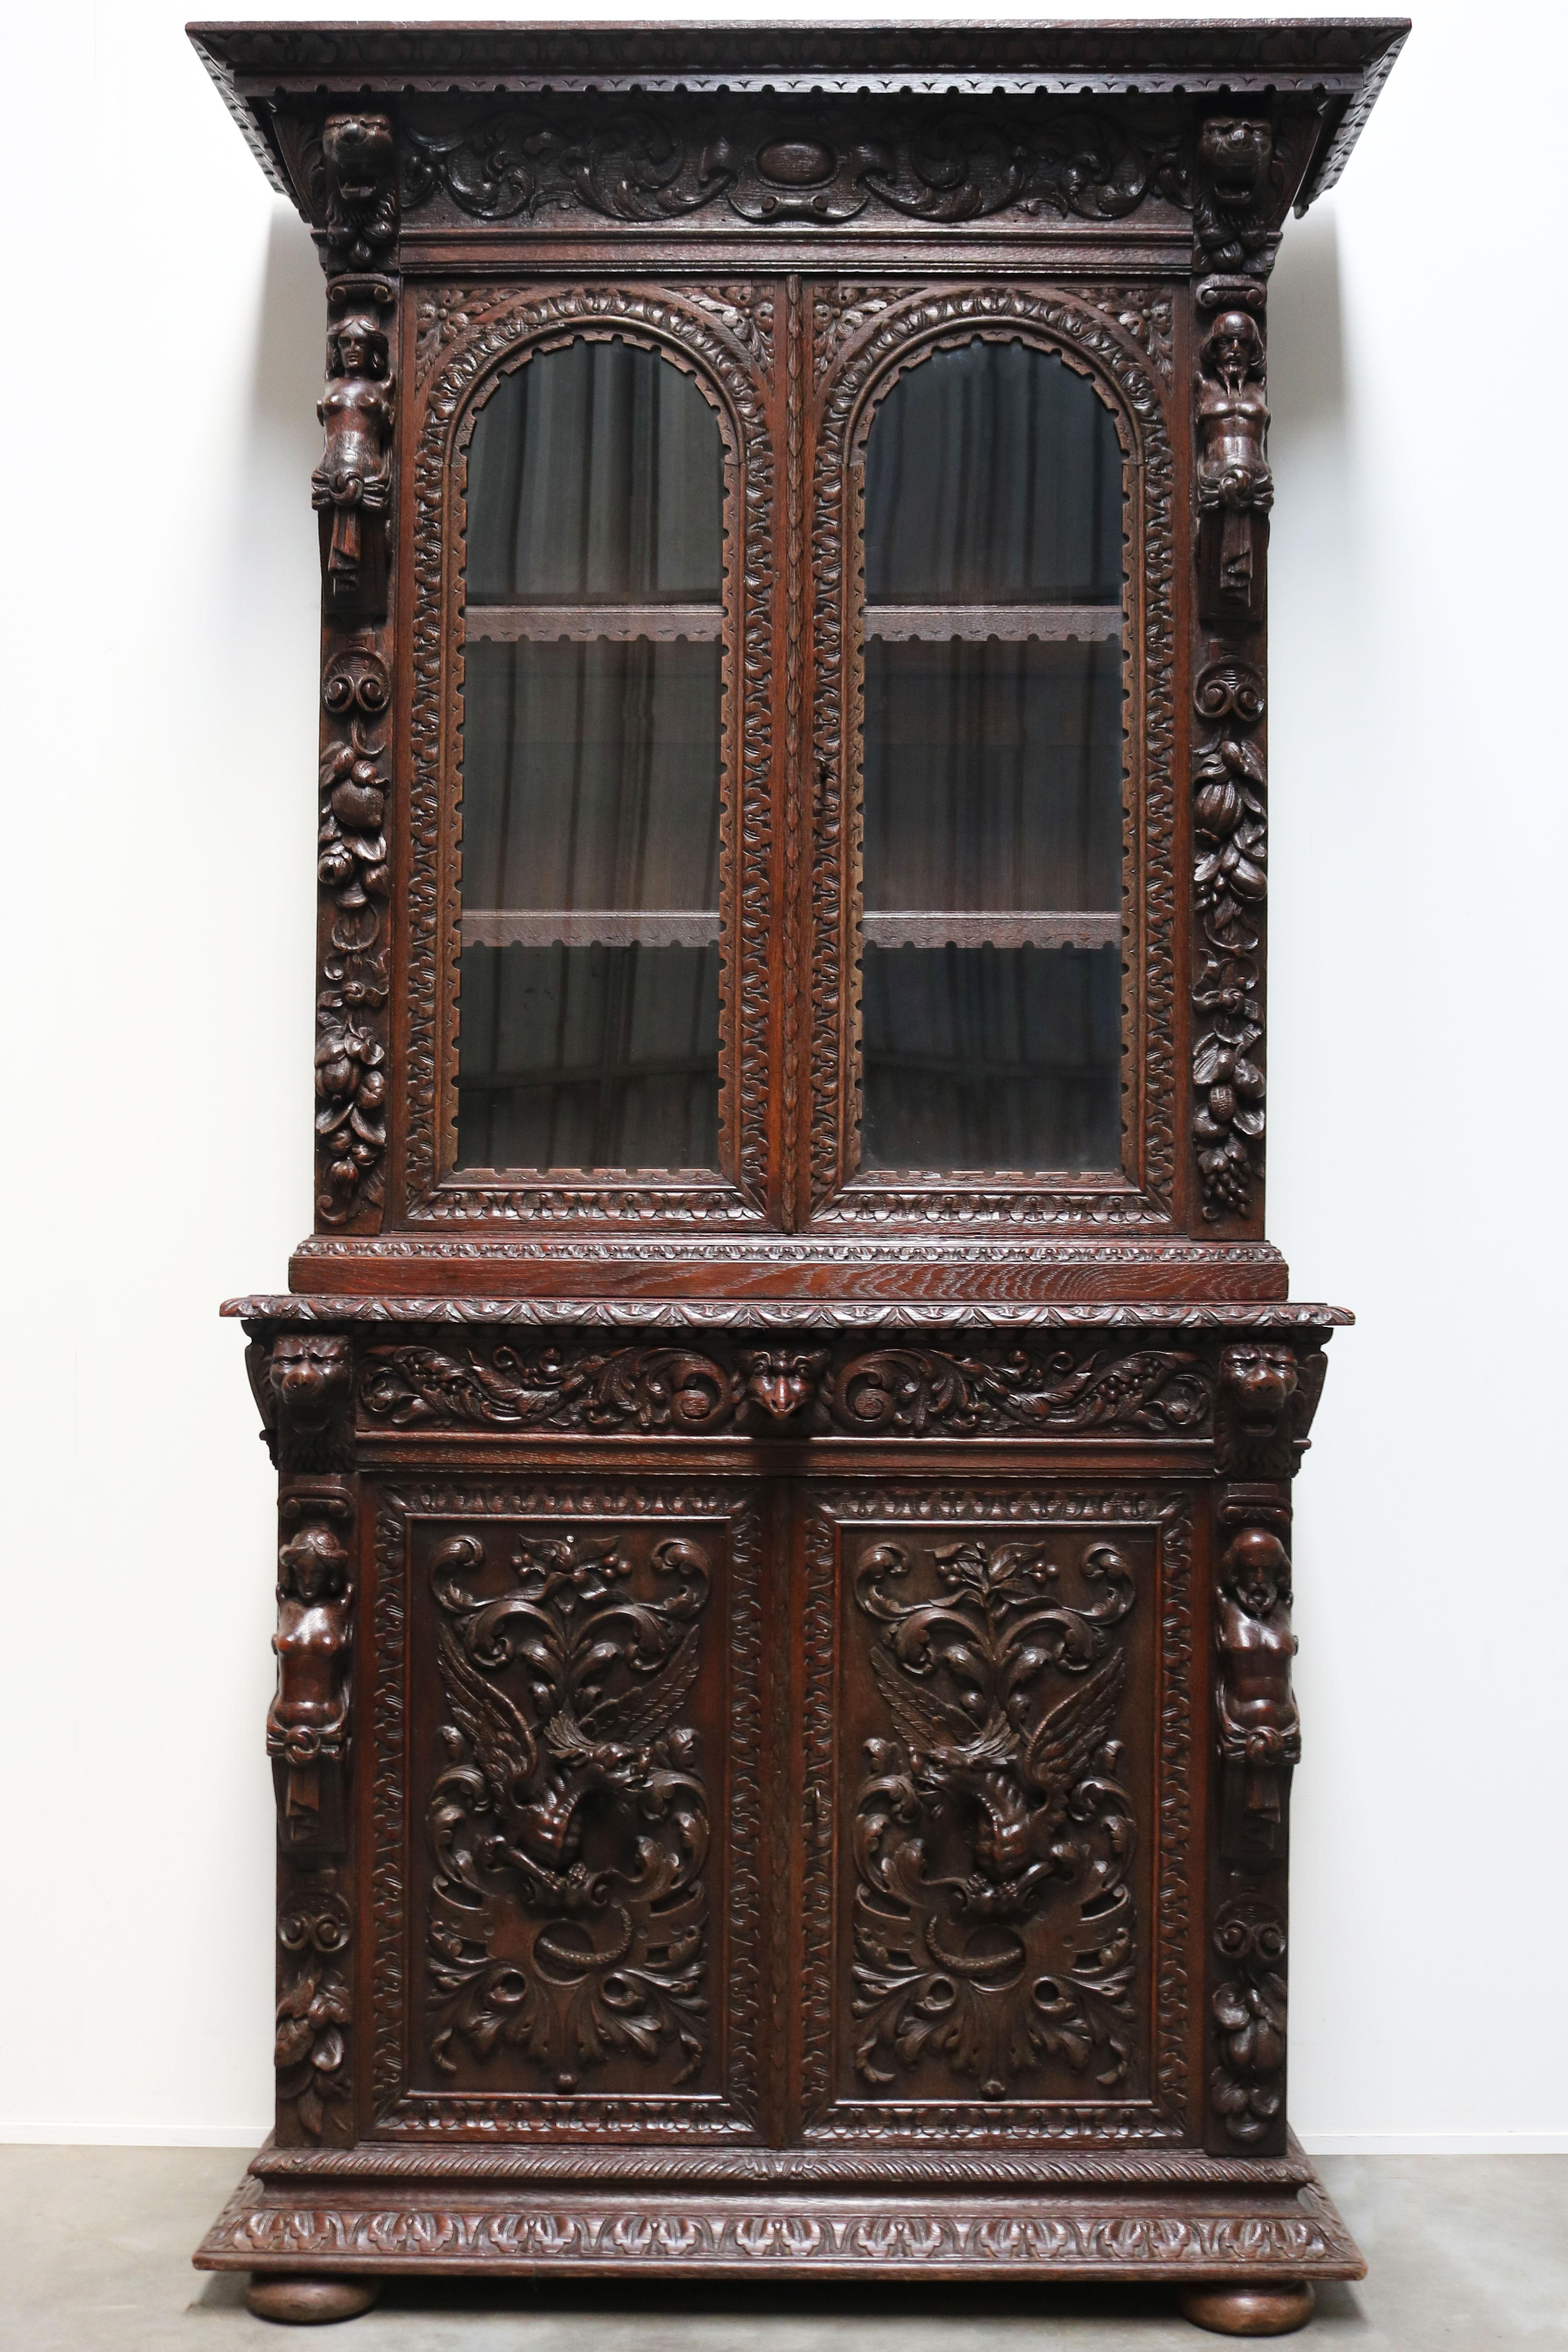 Exquisite & stunning! This rare 19th century Italian Renaissance Revival cabinet / bookcase / buffet in carved oak. 
The craftsmanship of the lion heads, angels & dragons is simply marvelous. Hand carved from oak and free carved out of the cabinet